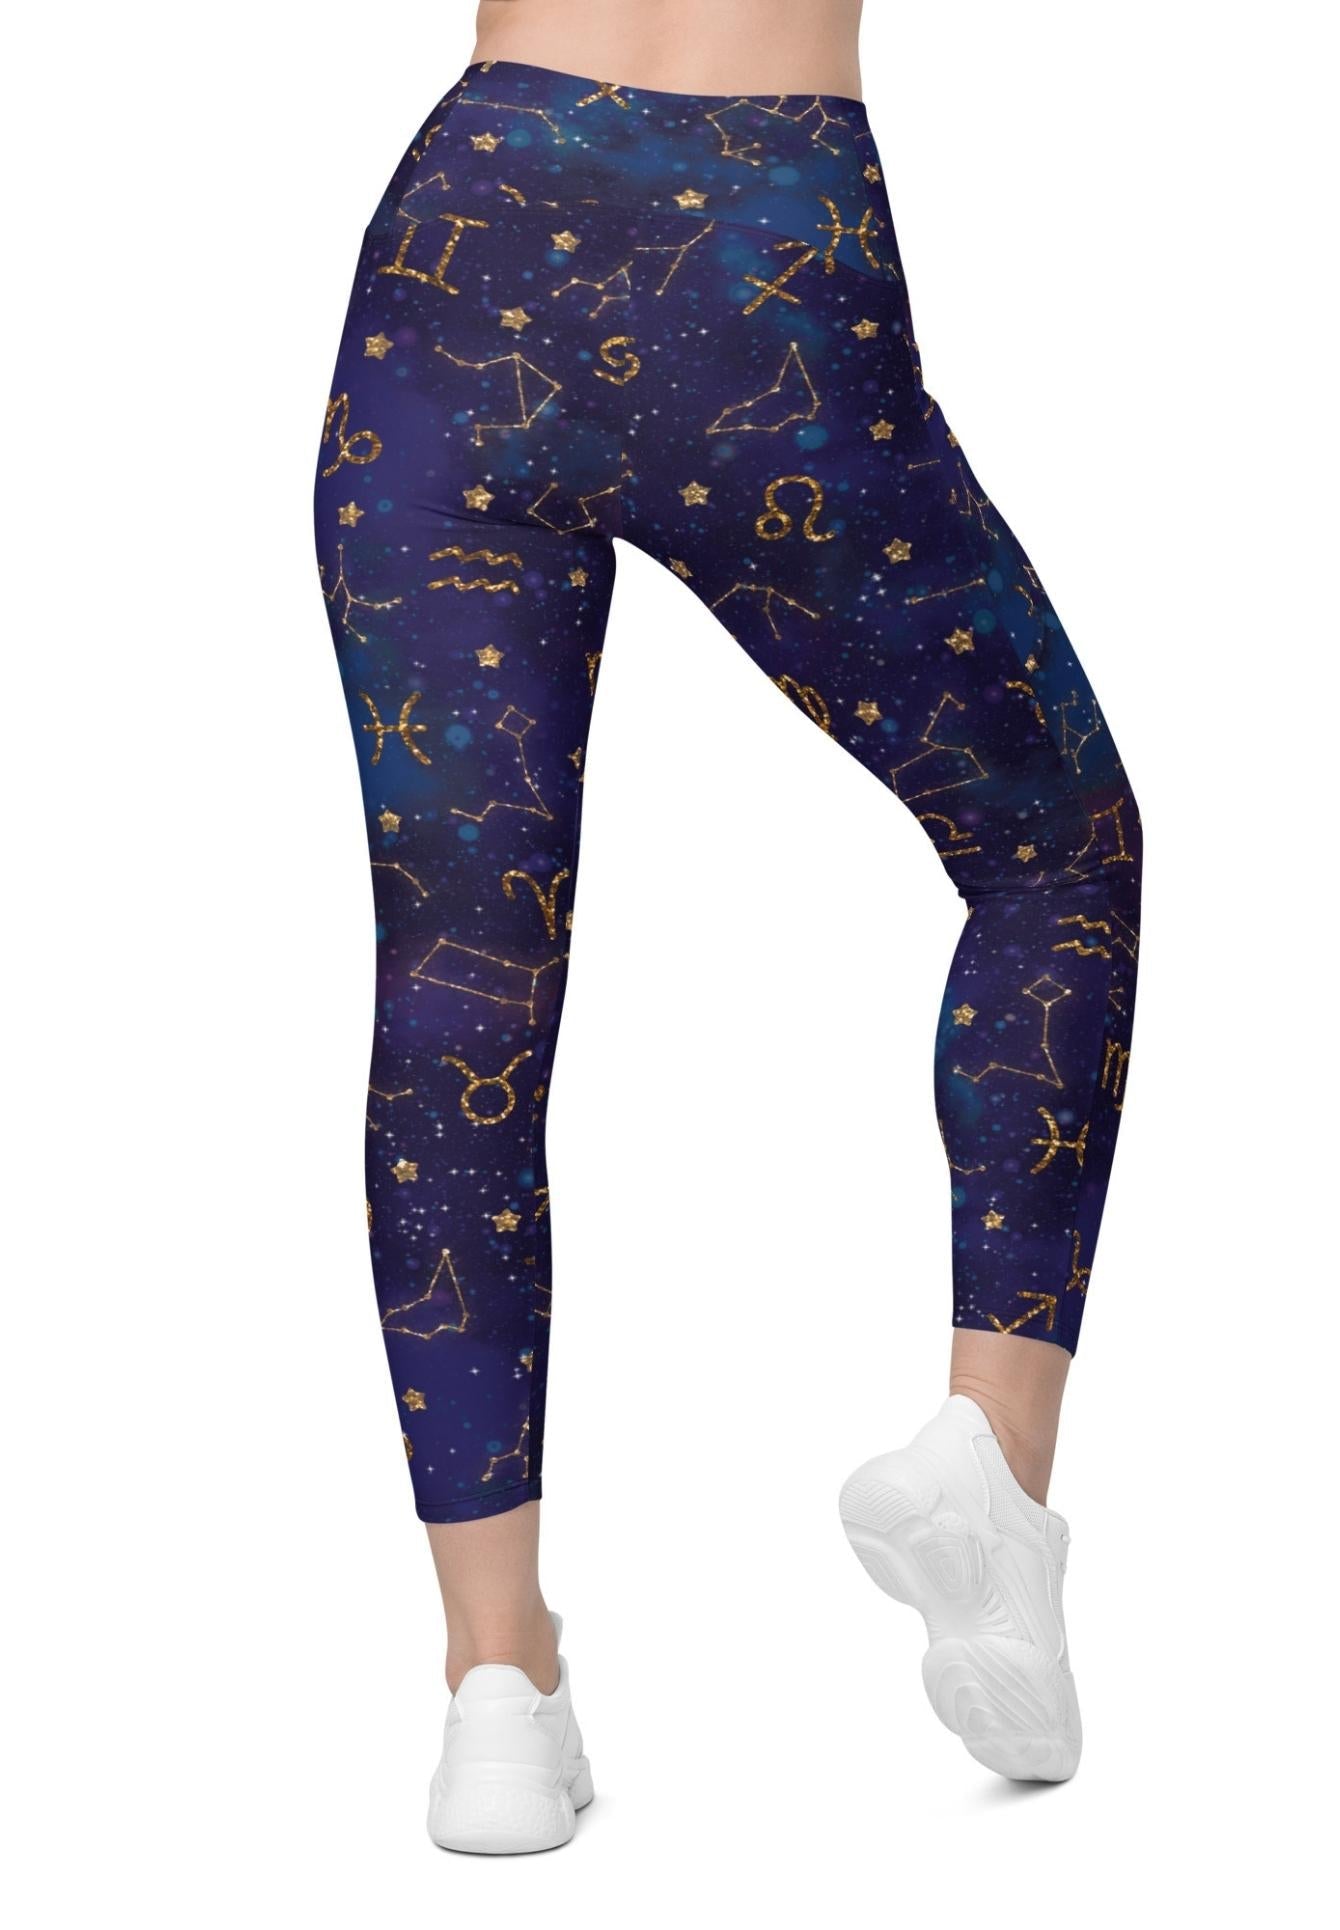 Zodiac Signs Crossover Leggings With Pockets